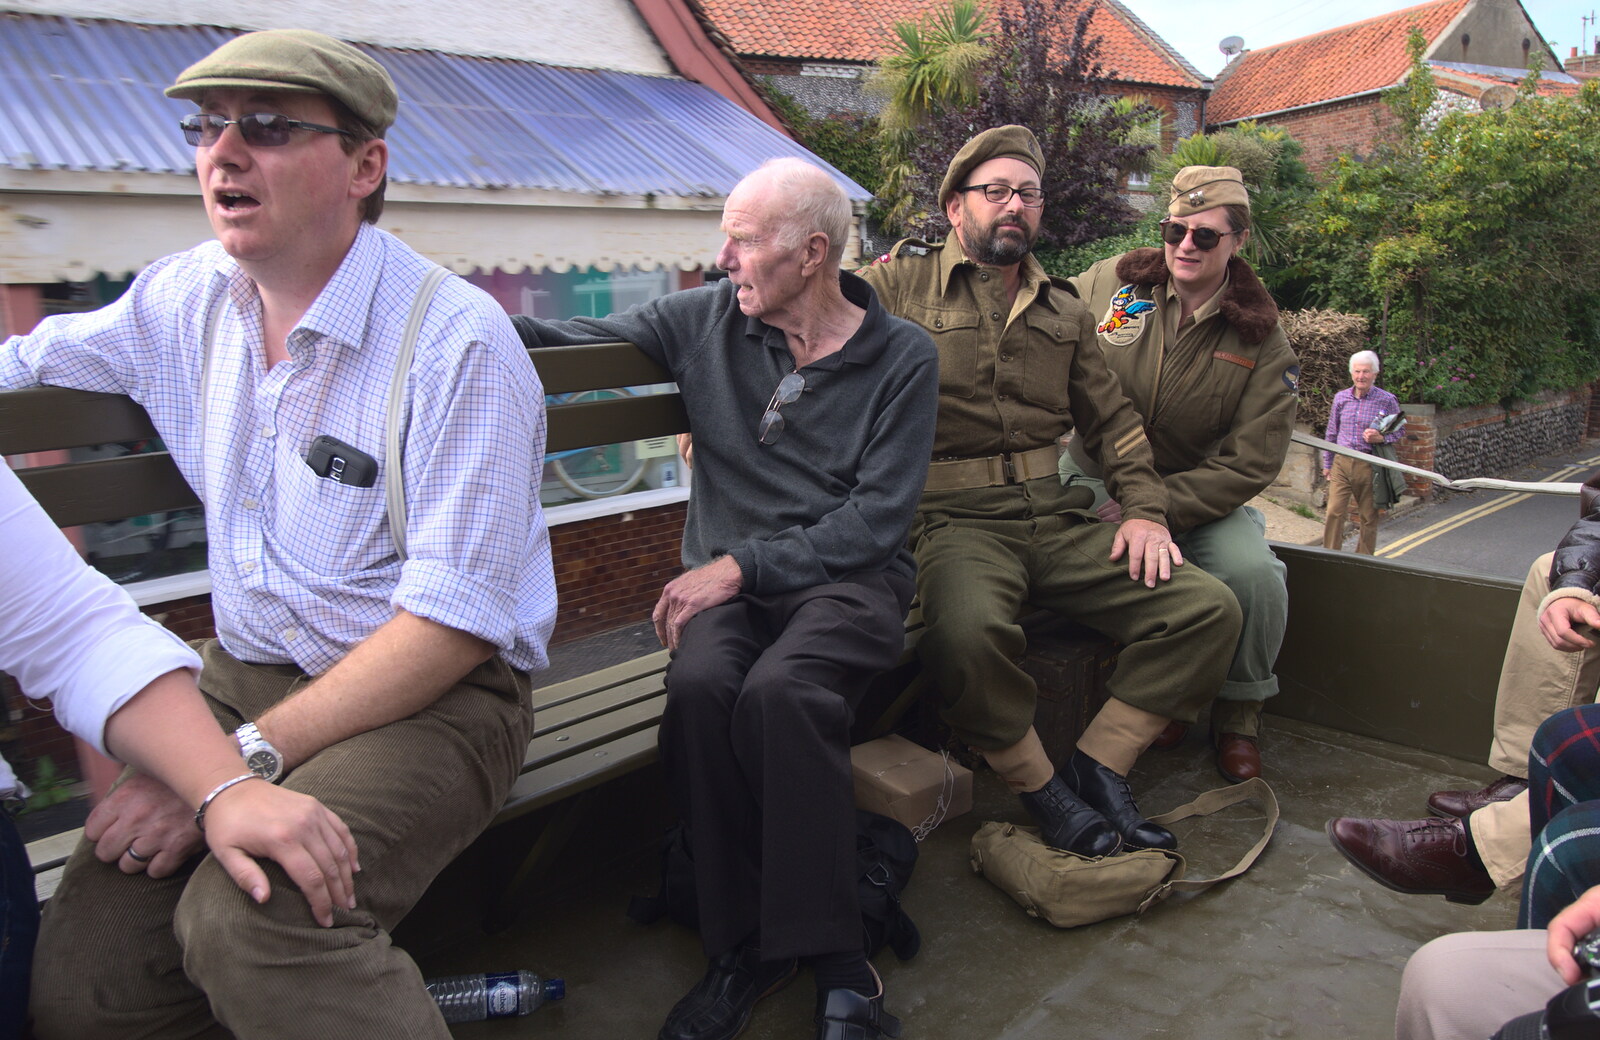 Grandad hangs out with the army guys from A Steamy 1940s Day Out, Holt and Sheringham, Norfolk - 20th September 2015